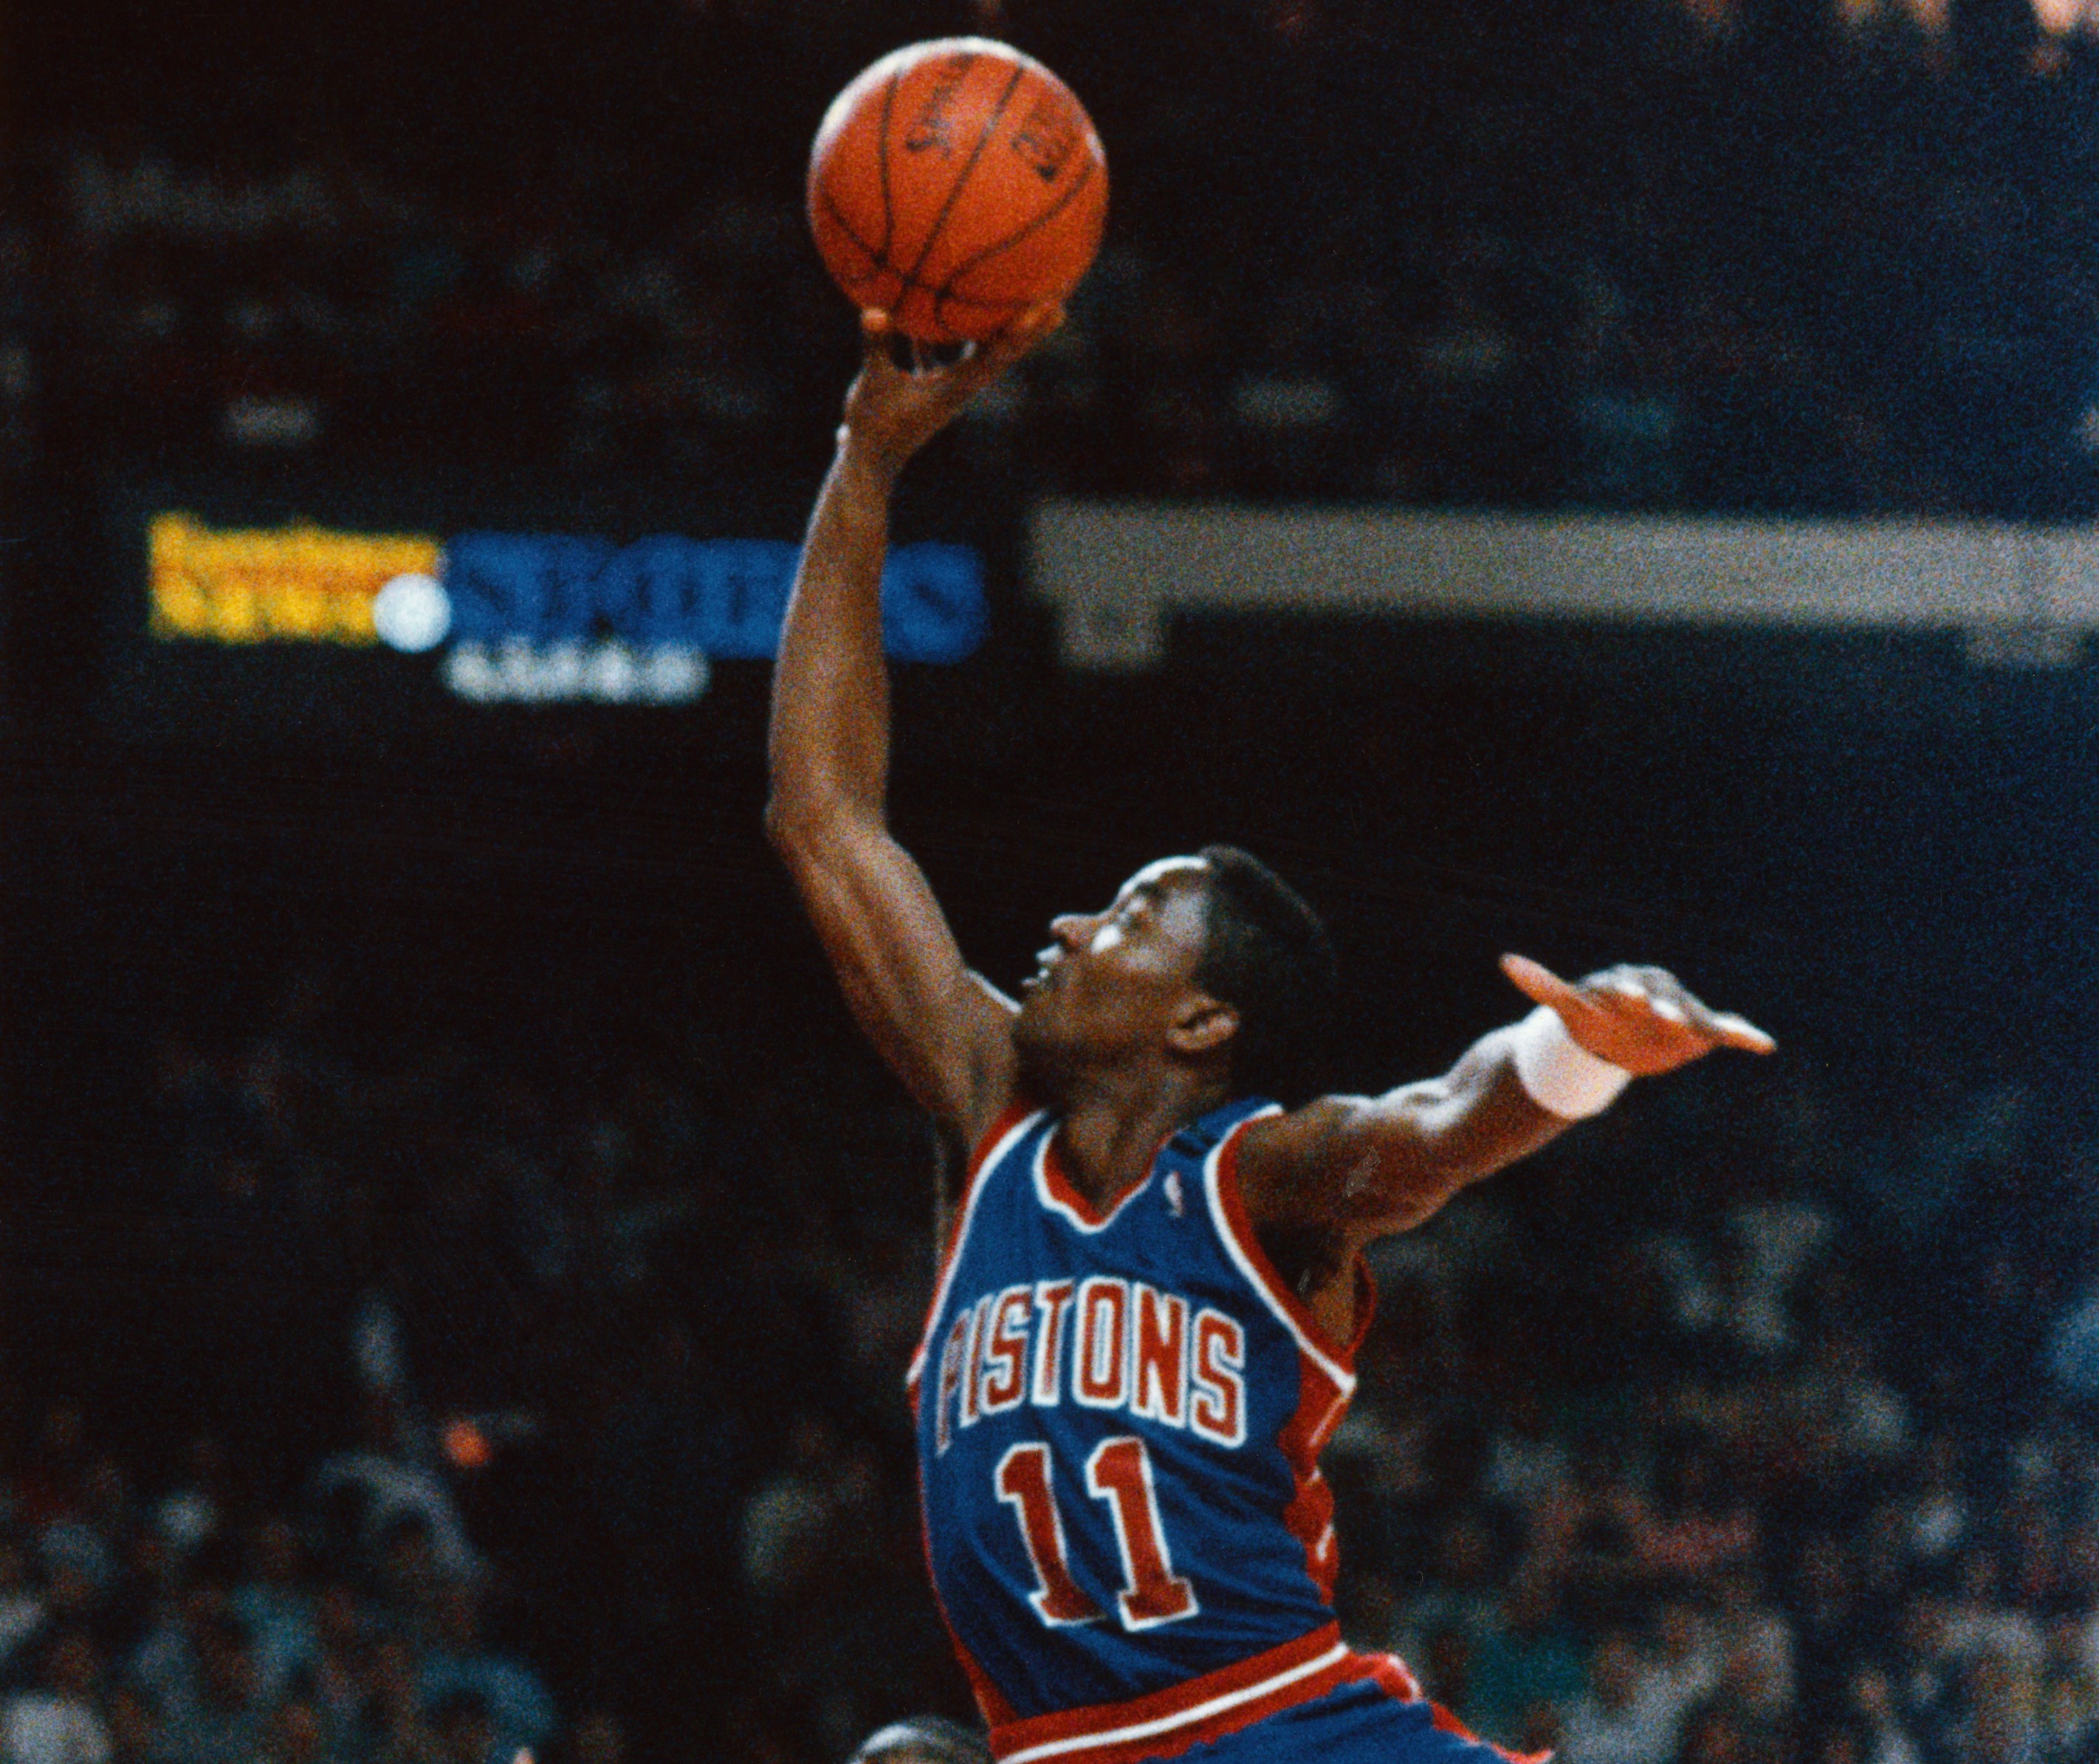 Ranking the Top 10 NBA Point Guards of the 1980s